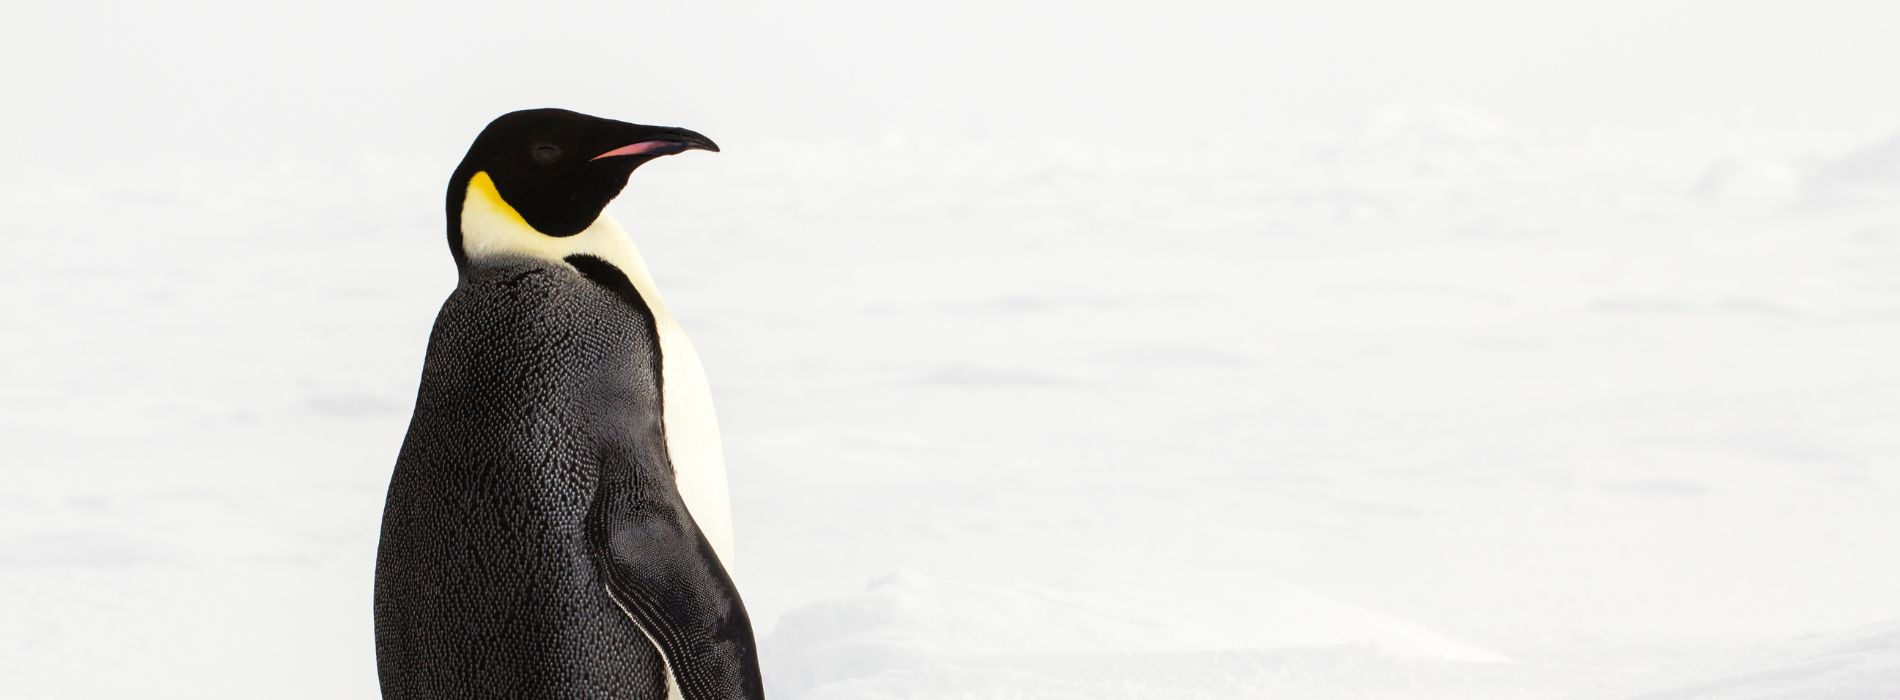 Are there penguins in Iceland? Let's Take a Closer Look...